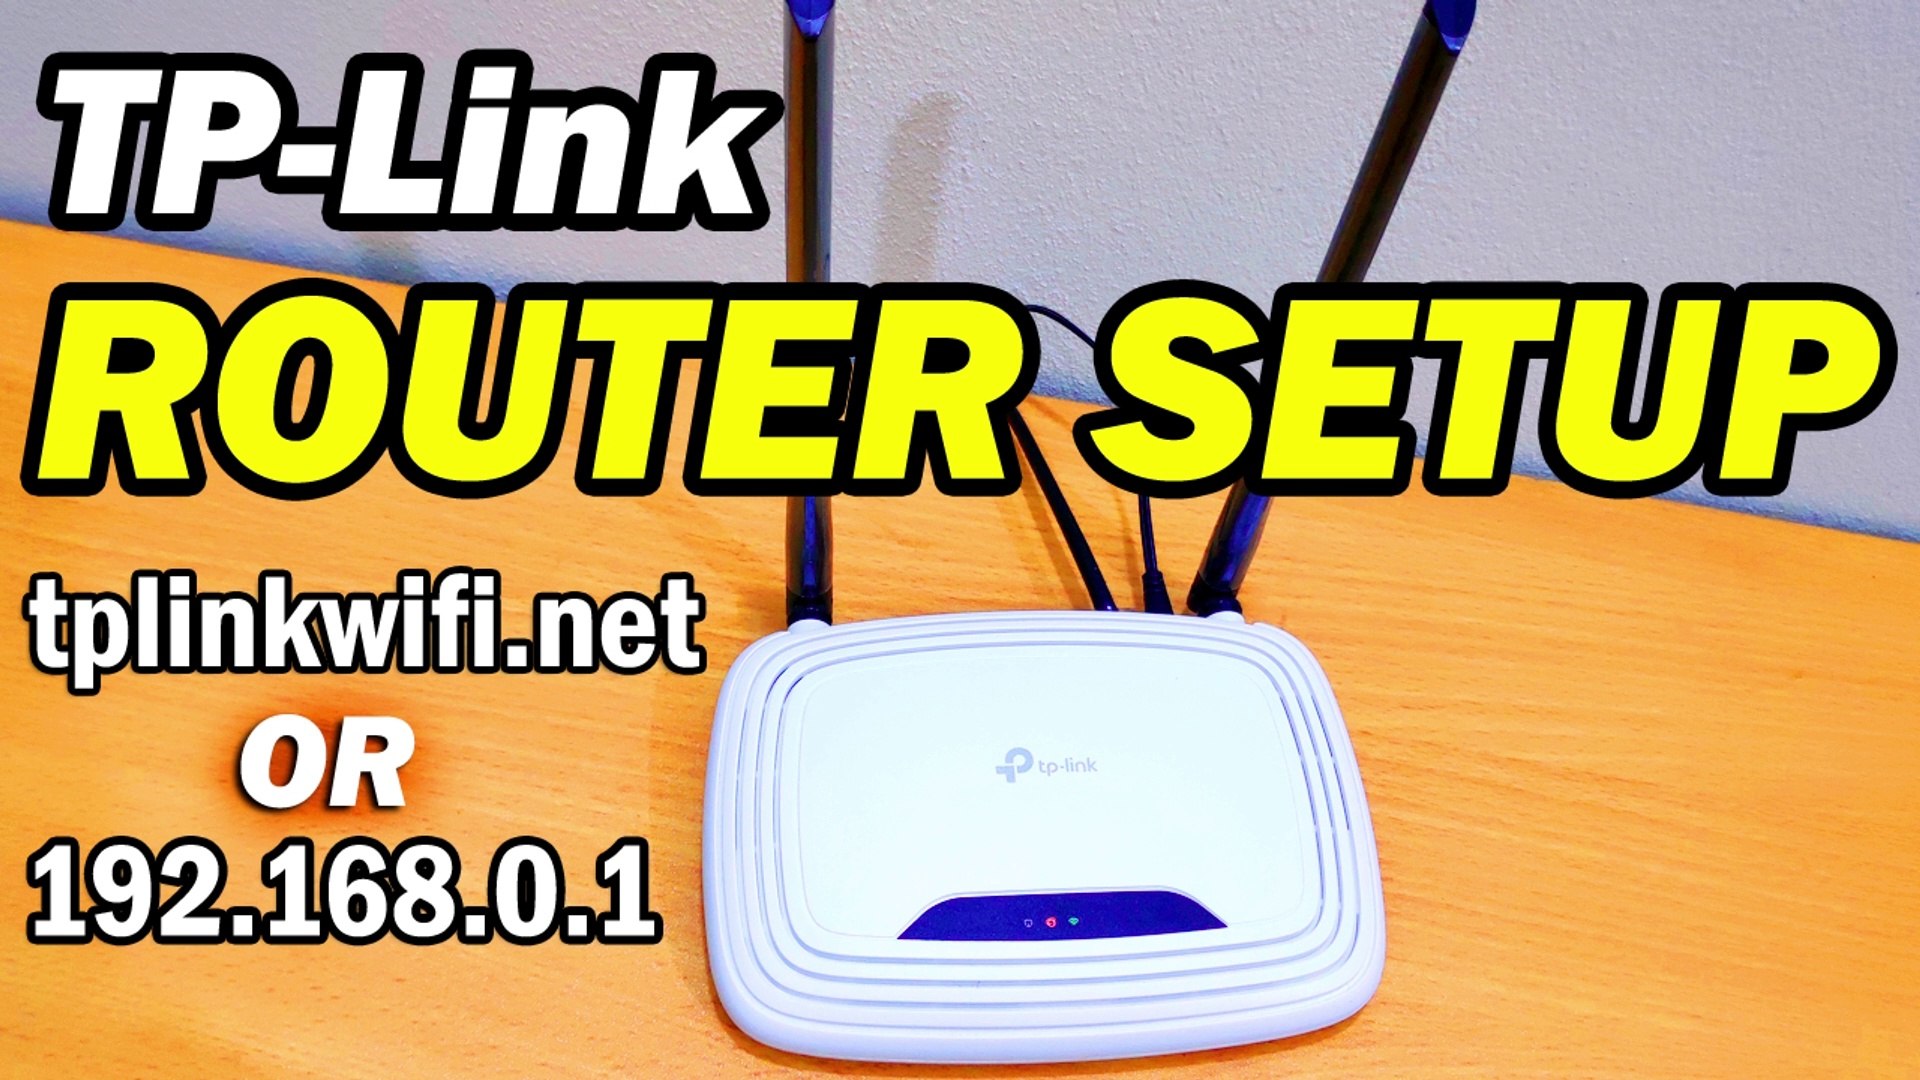 TP-Link TL-WR841N Router Setup and Full Configuration - video Dailymotion